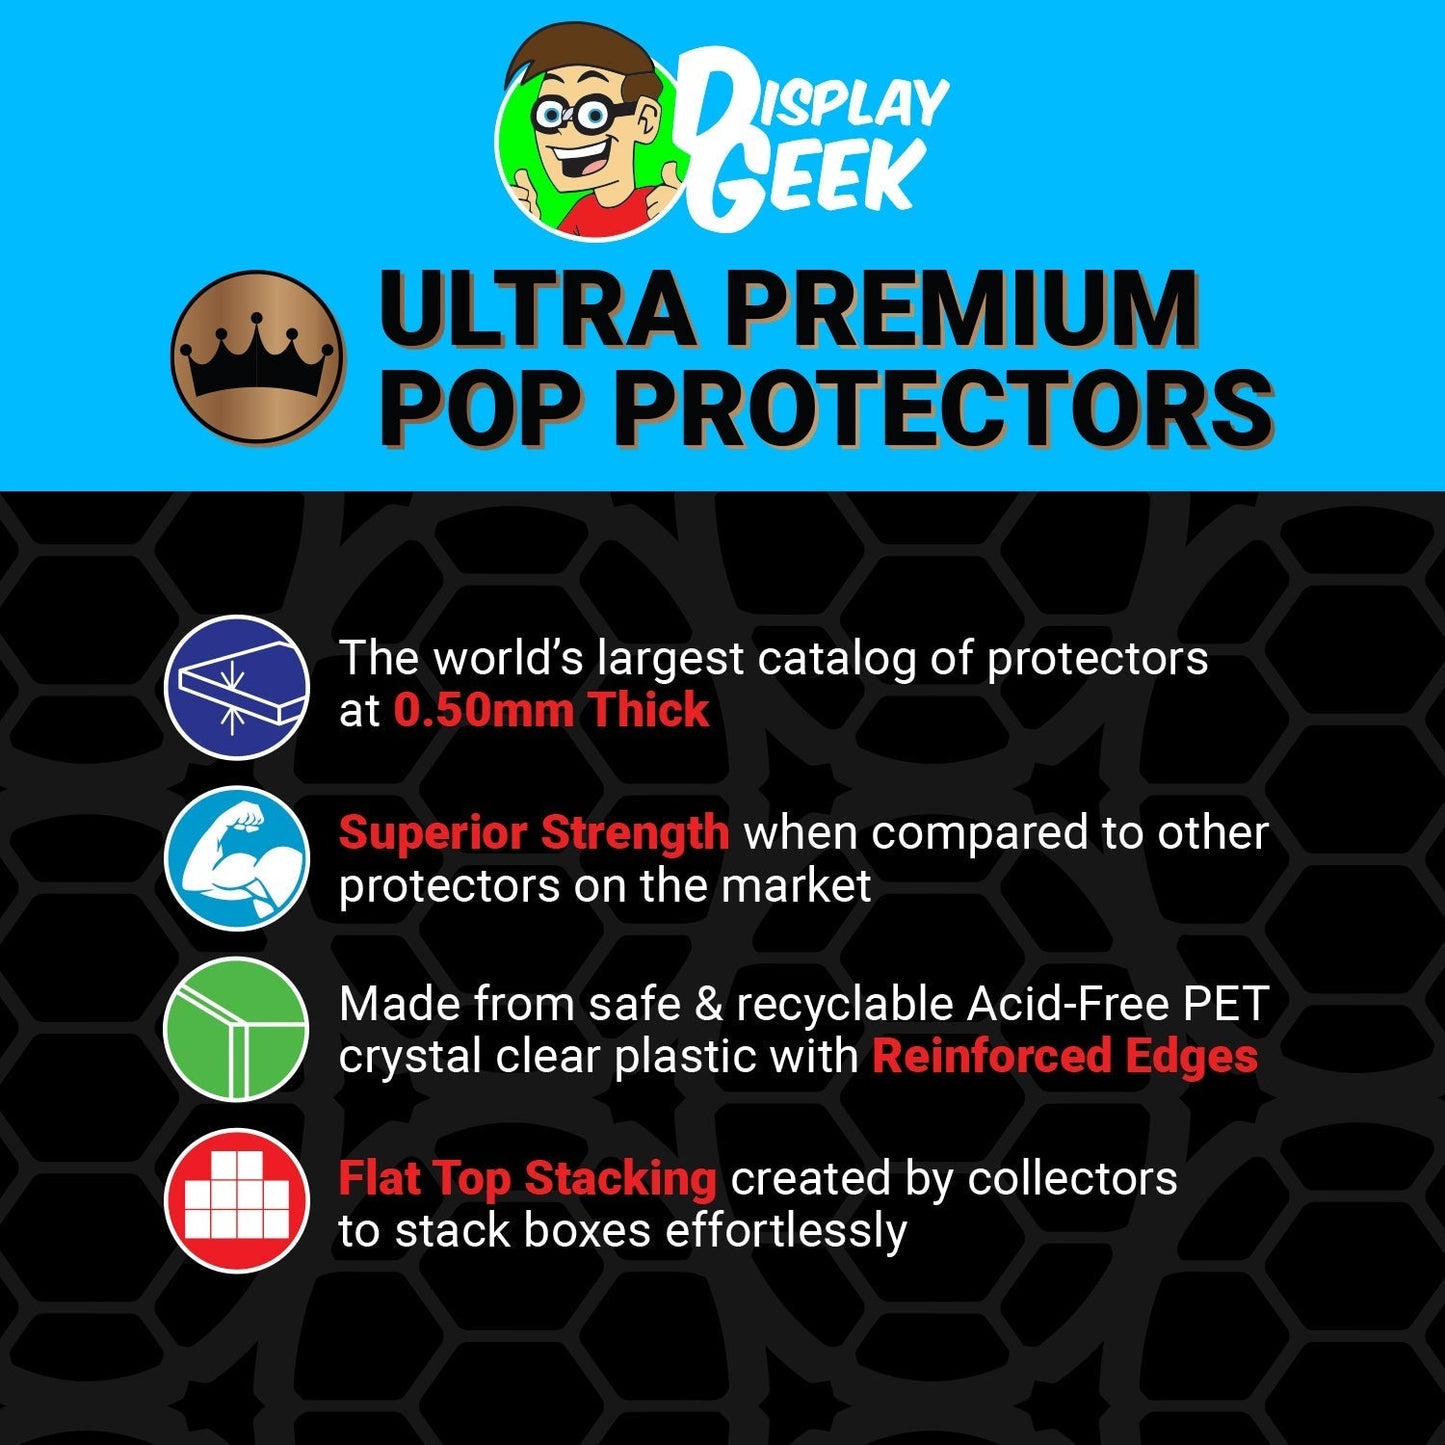 Pop Protector for Betty Boop Color Funko Pop Pez - PPG Pop Protector Guide Search Created by Display Geek